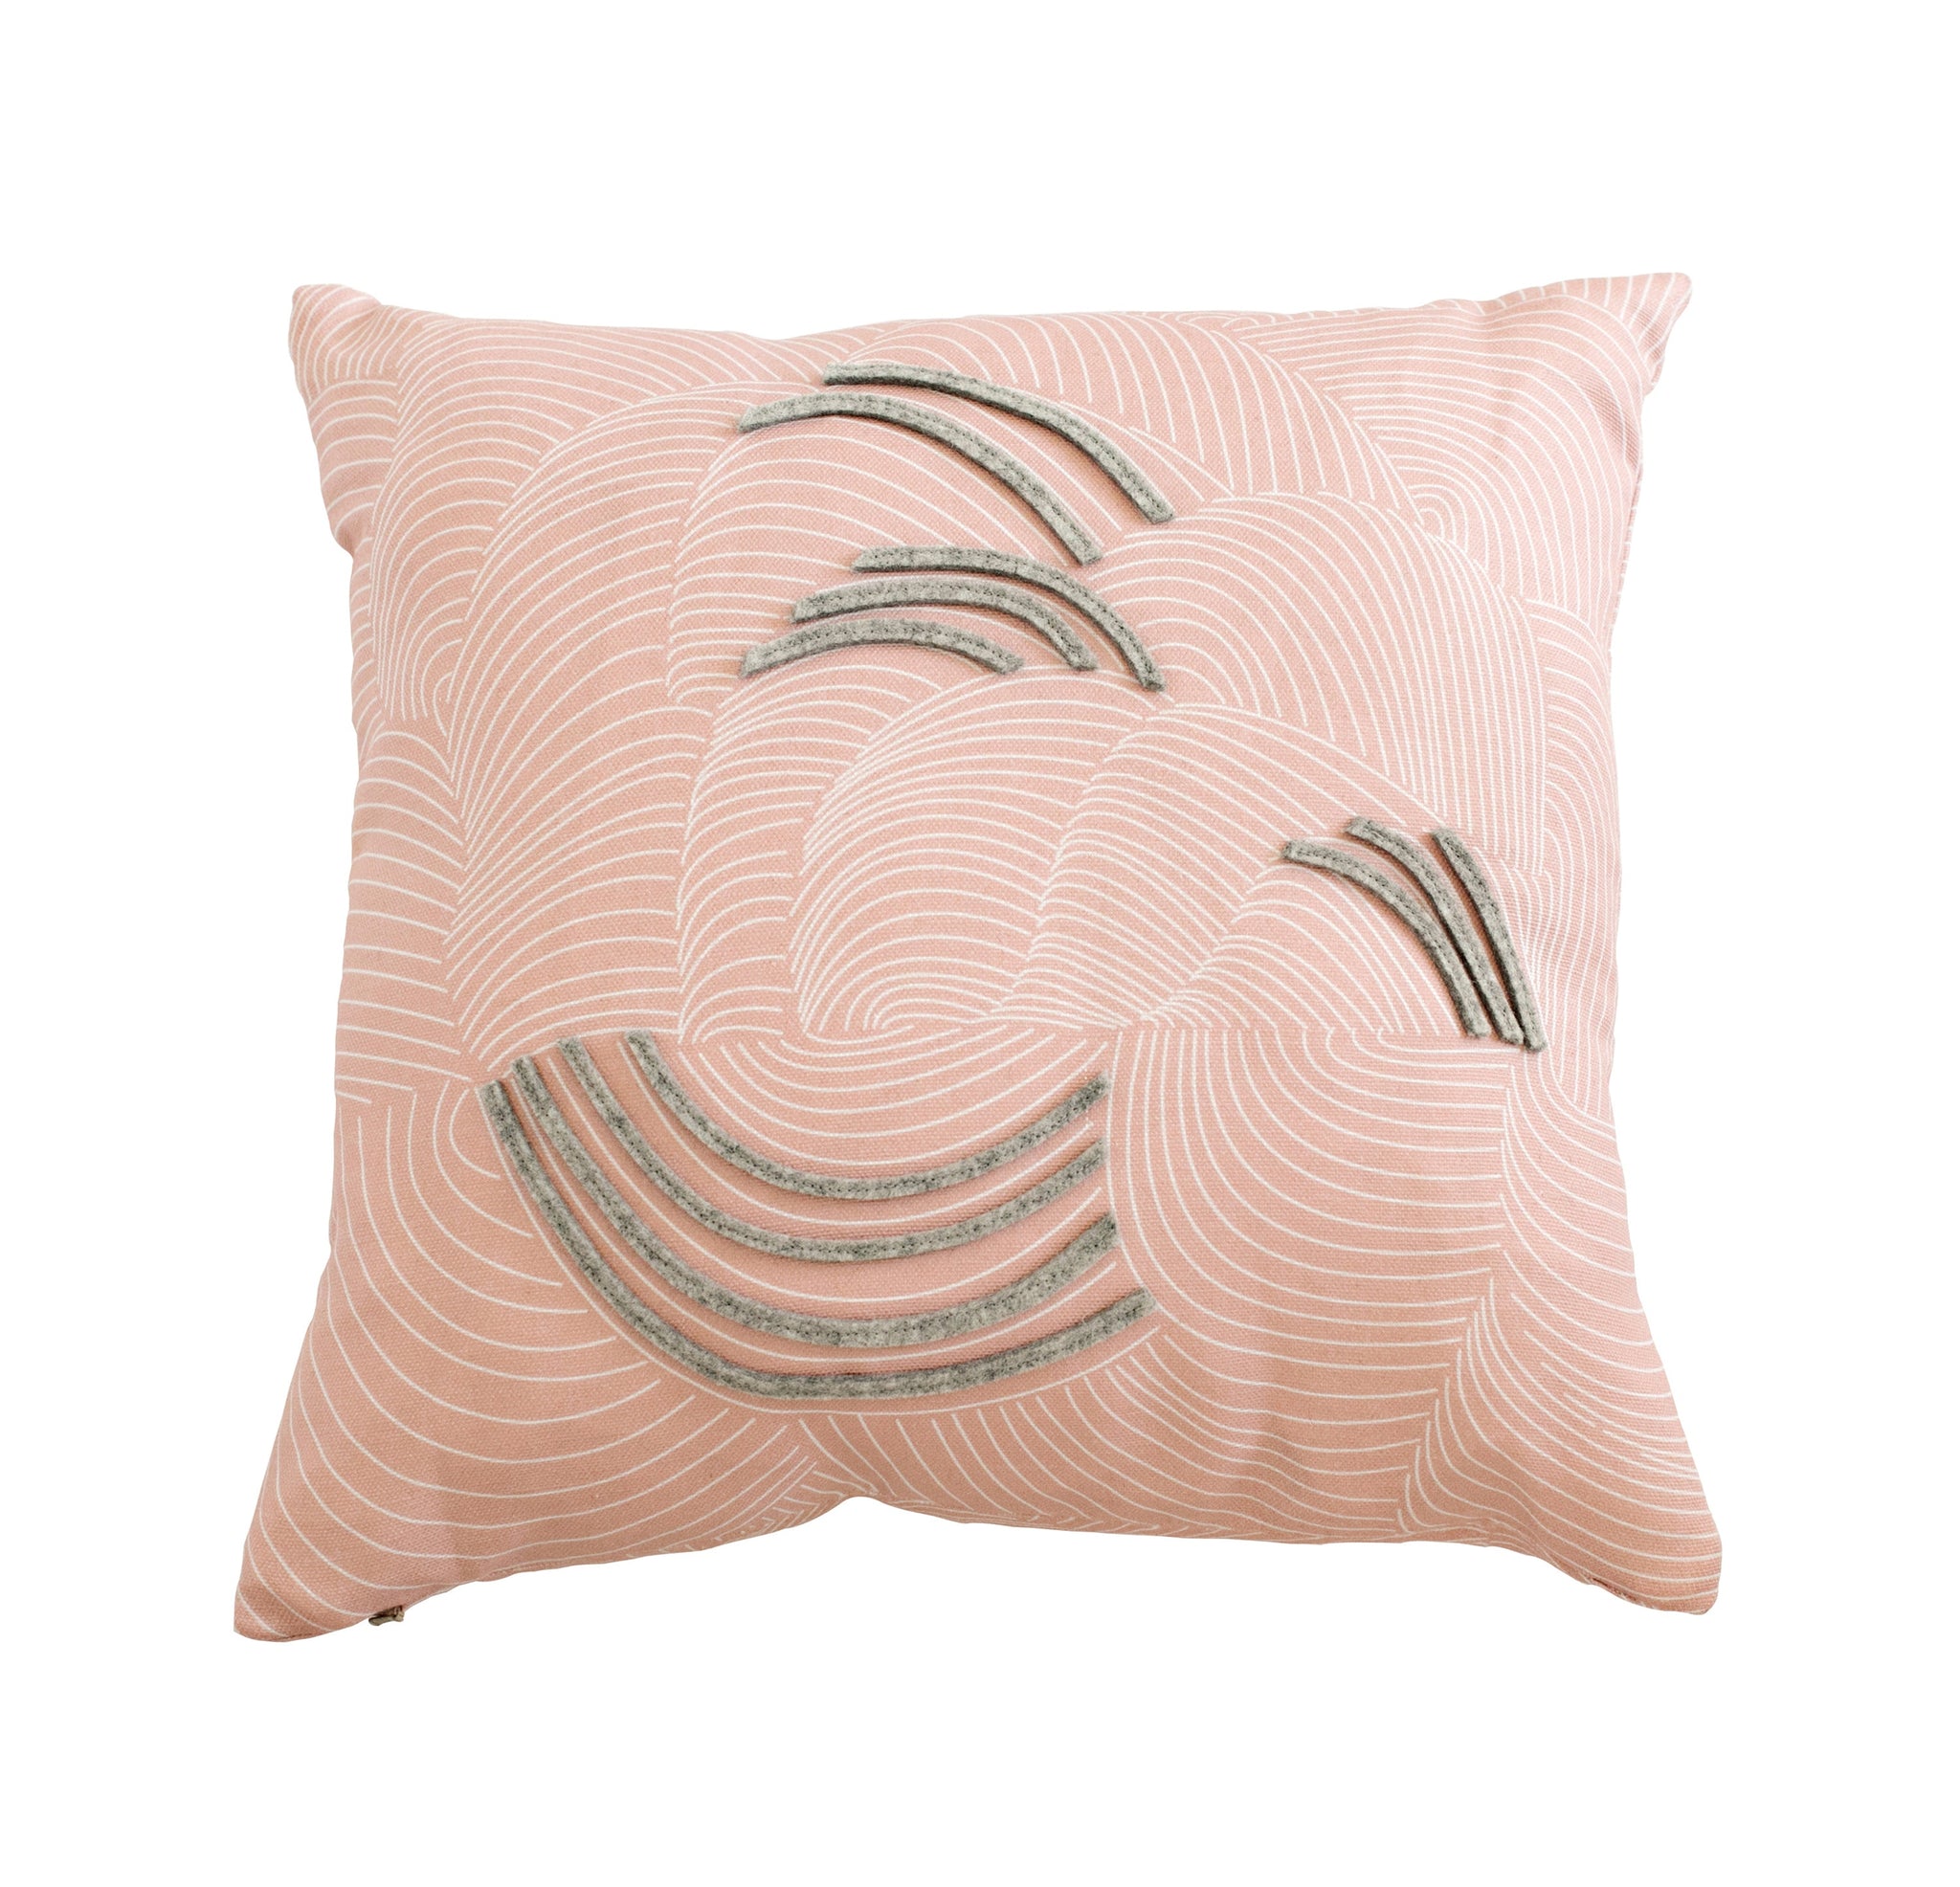 COCOON PILLOW | DUSTY ROSE